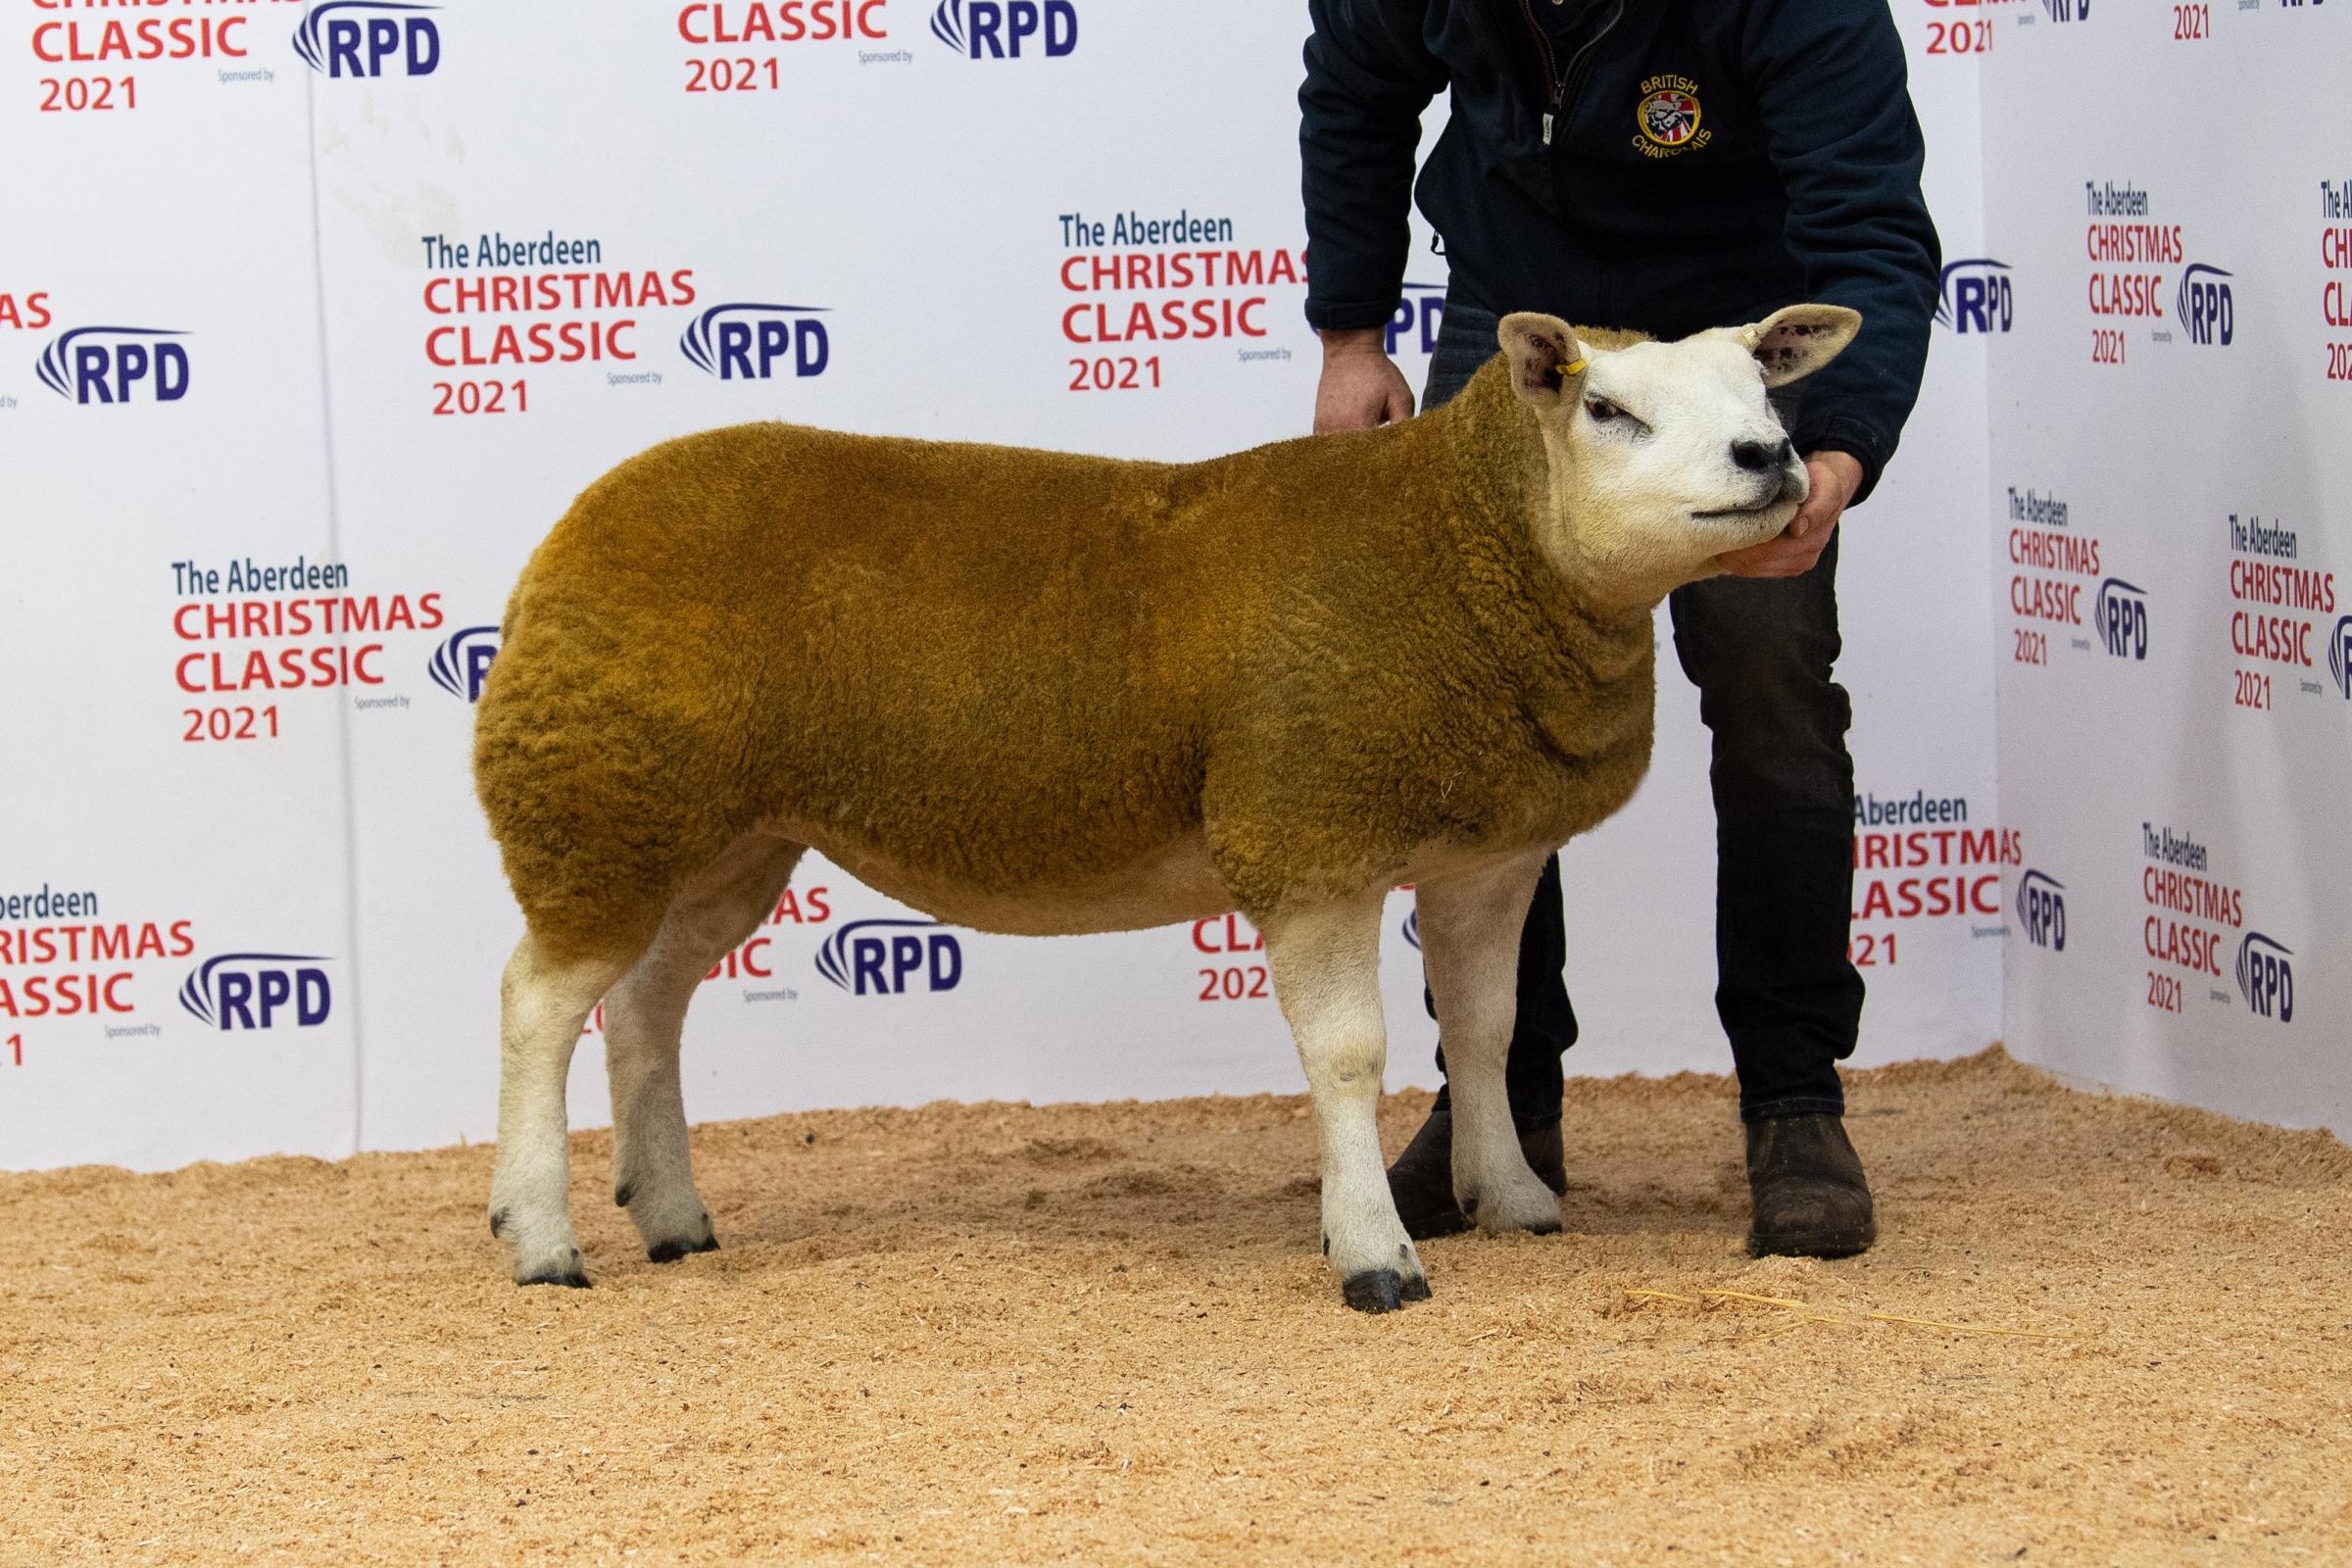 Best from Harestone at 2500gns was this Texel gimmer Ref:RH291121122 Rob Haining / The Scottish Farmer...